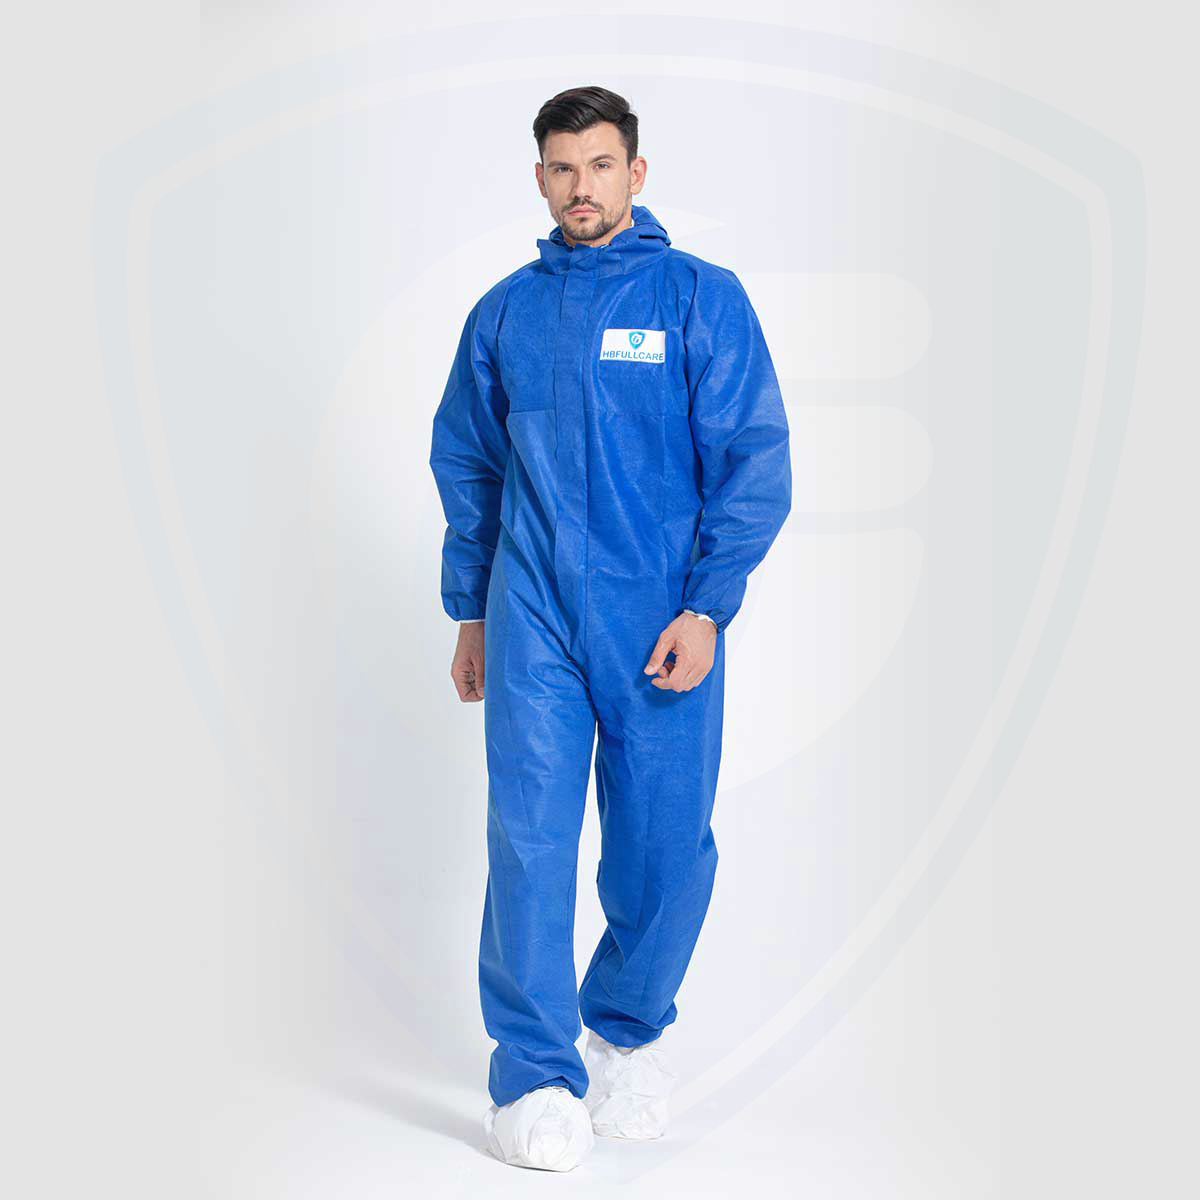 Durable Disposable Fire Retardant Coverall Protection Against Radioactive Particulate Contamination